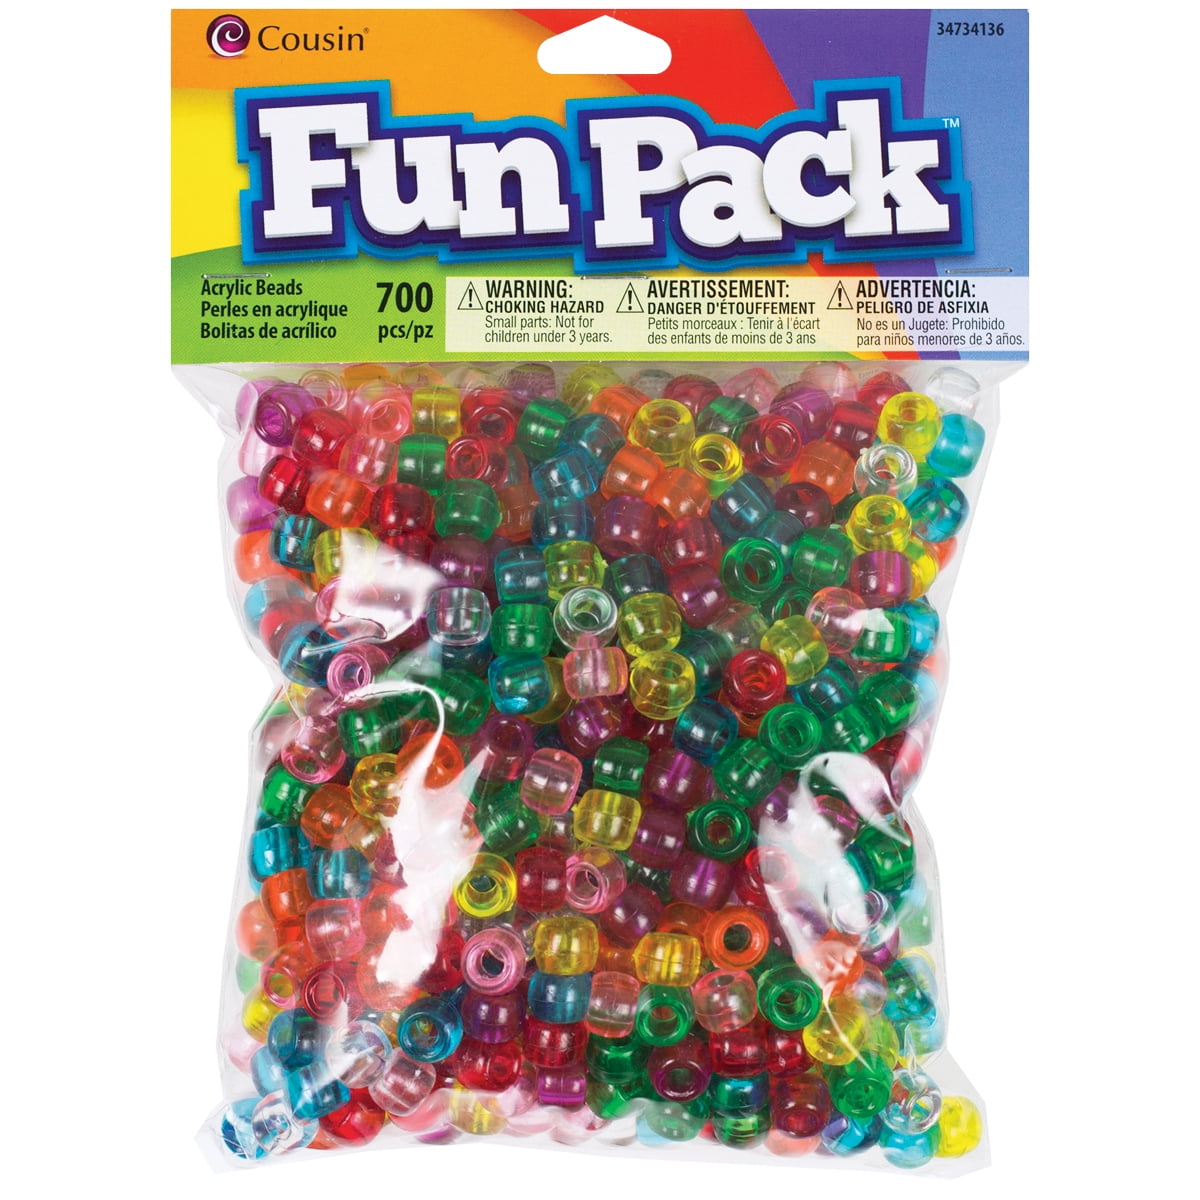 Cousin Fun Pack Acrylic Sports Beads 1Oz-Assorted Balls